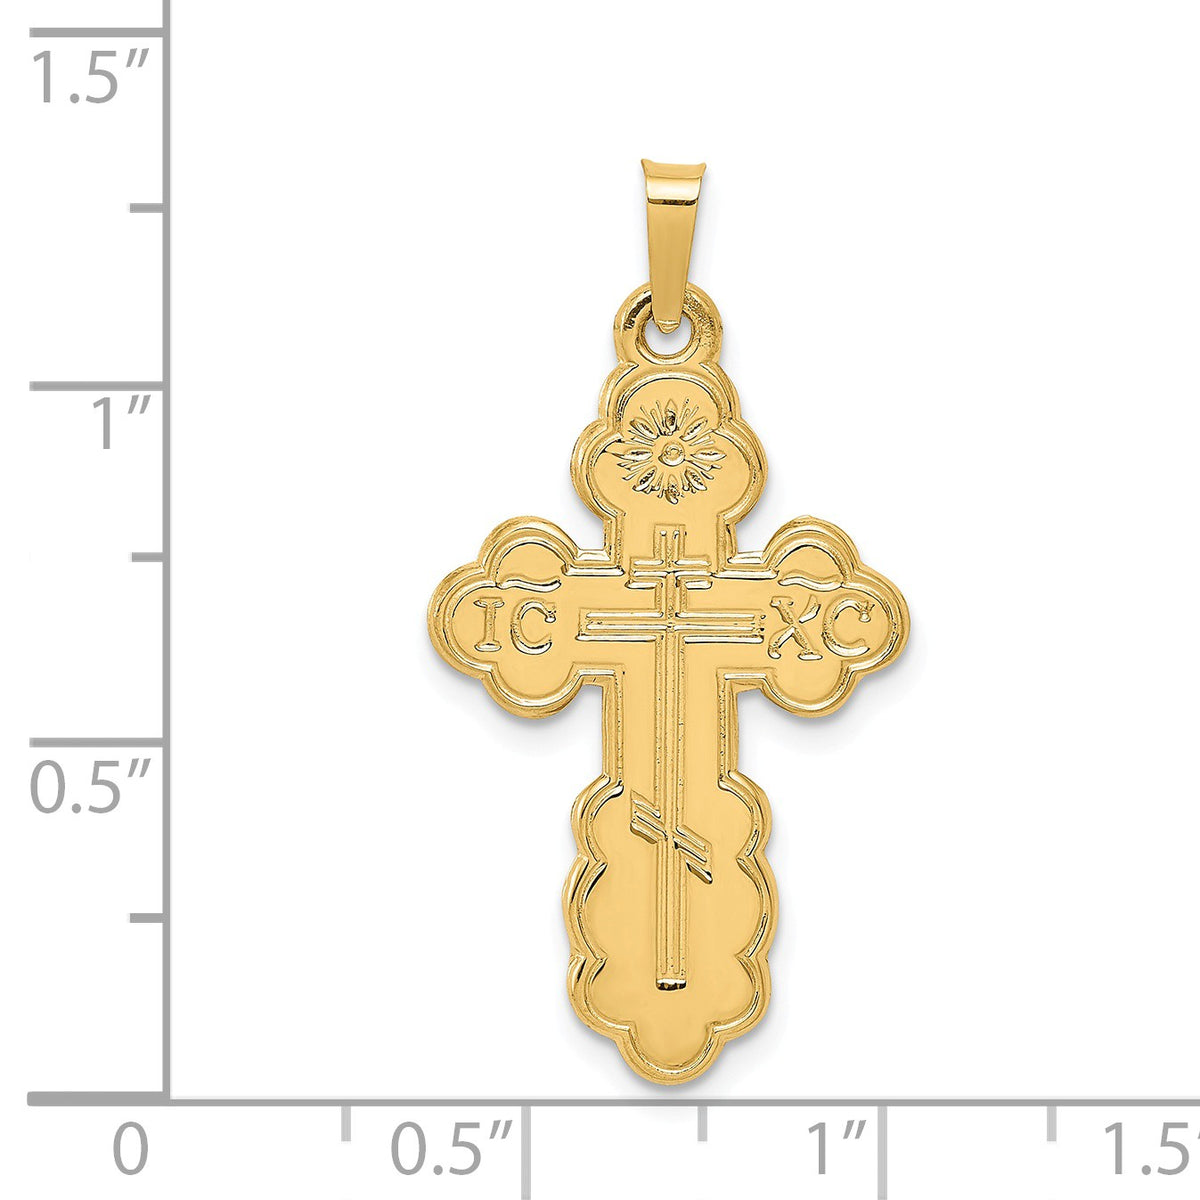 Alternate view of the 14k Yellow Gold Eastern Orthodox Cross (34mm) Necklace by The Black Bow Jewelry Co.